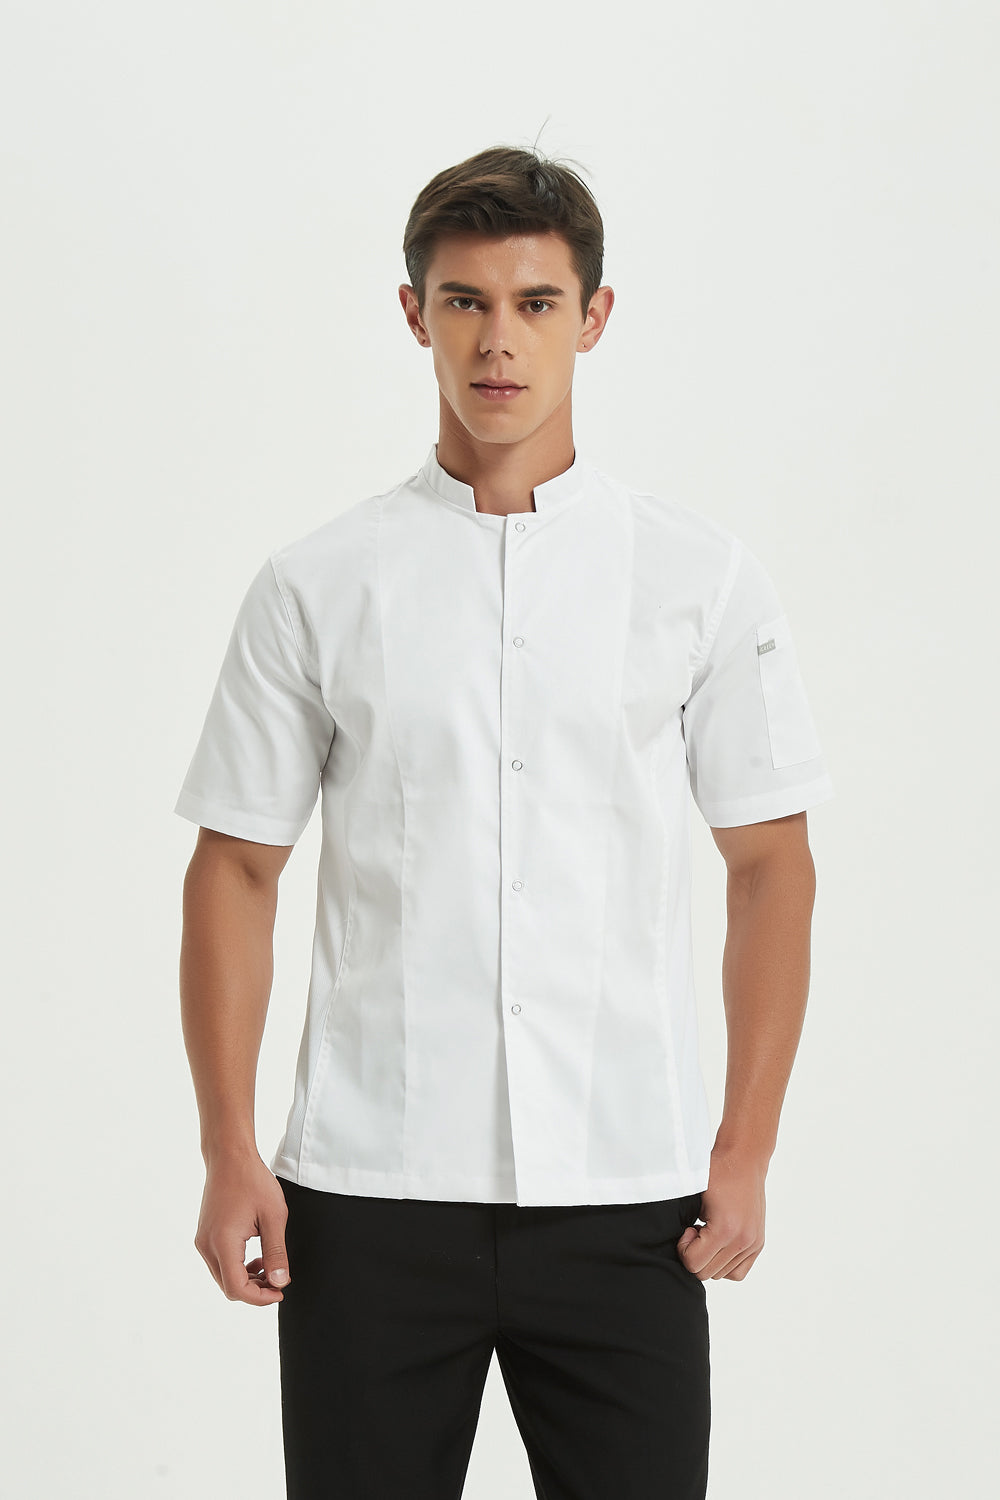 Mint Chef Jacket Short Sleeve with Dri-fit, Front View